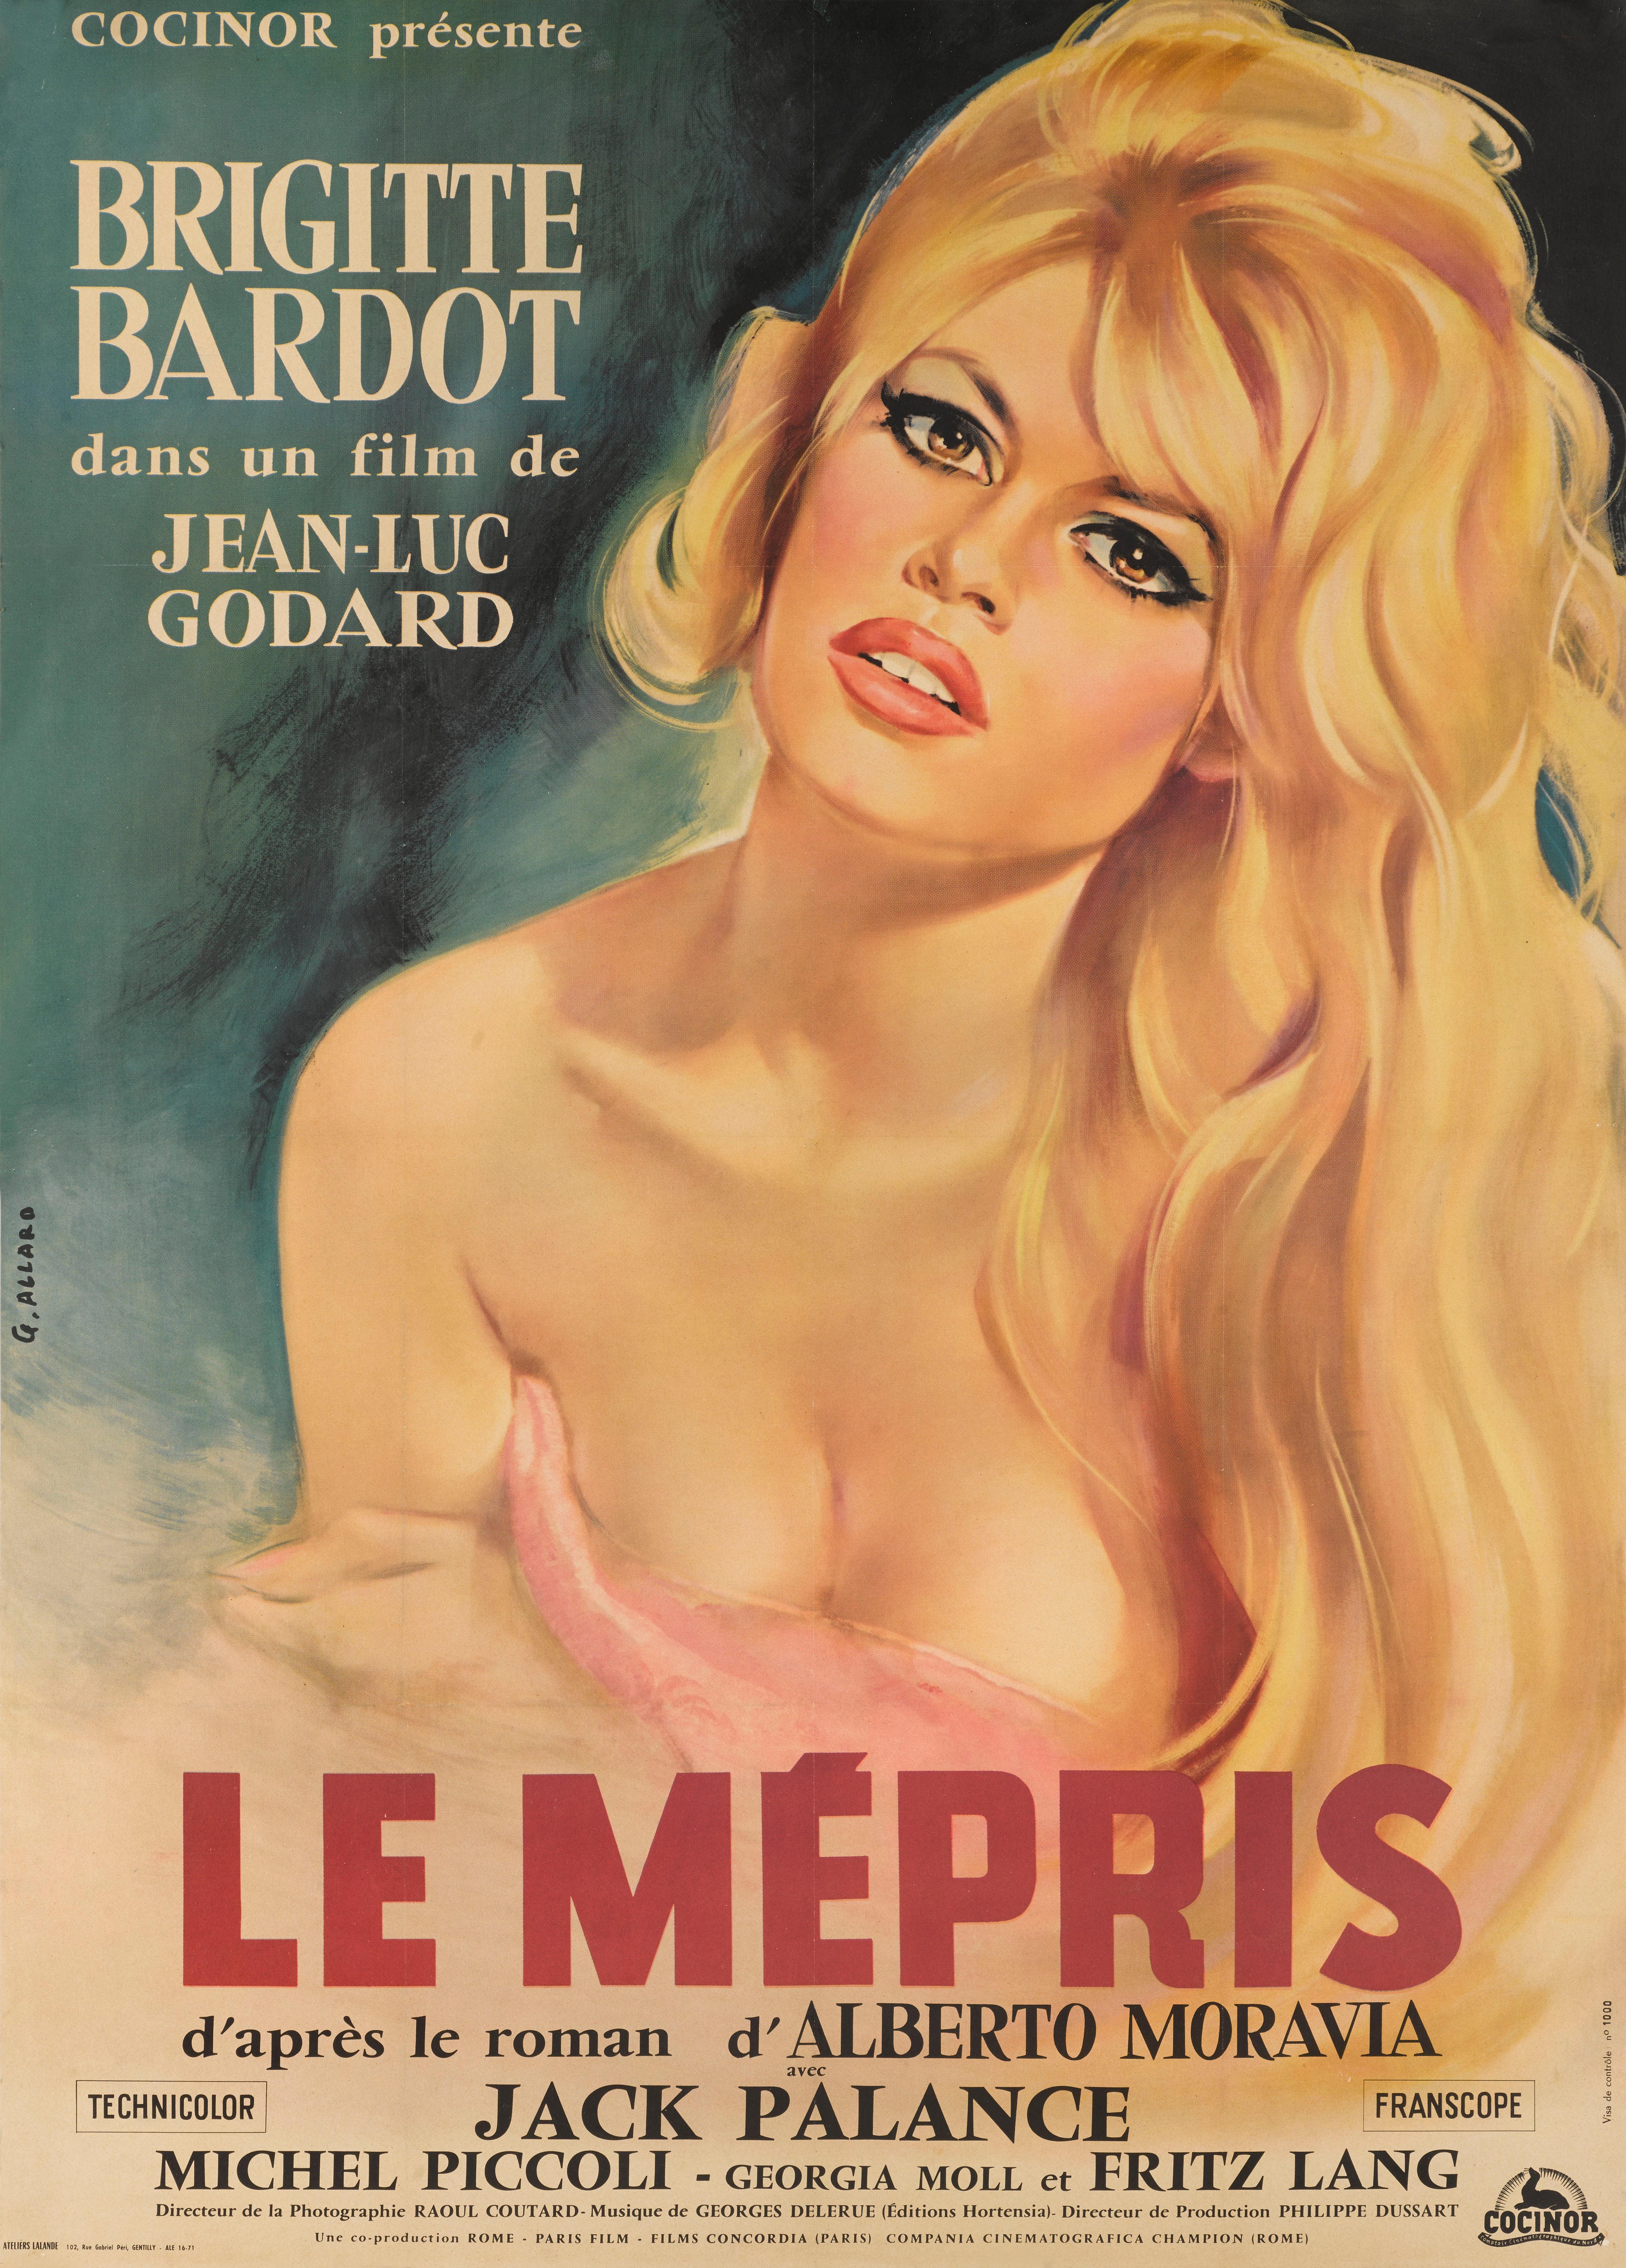 Original French movie poster for the 1963 French New Wave film directed by Jean-Luc Godard and staring Brigitte Bardot. The artwork is by the French artist Georges Allard.